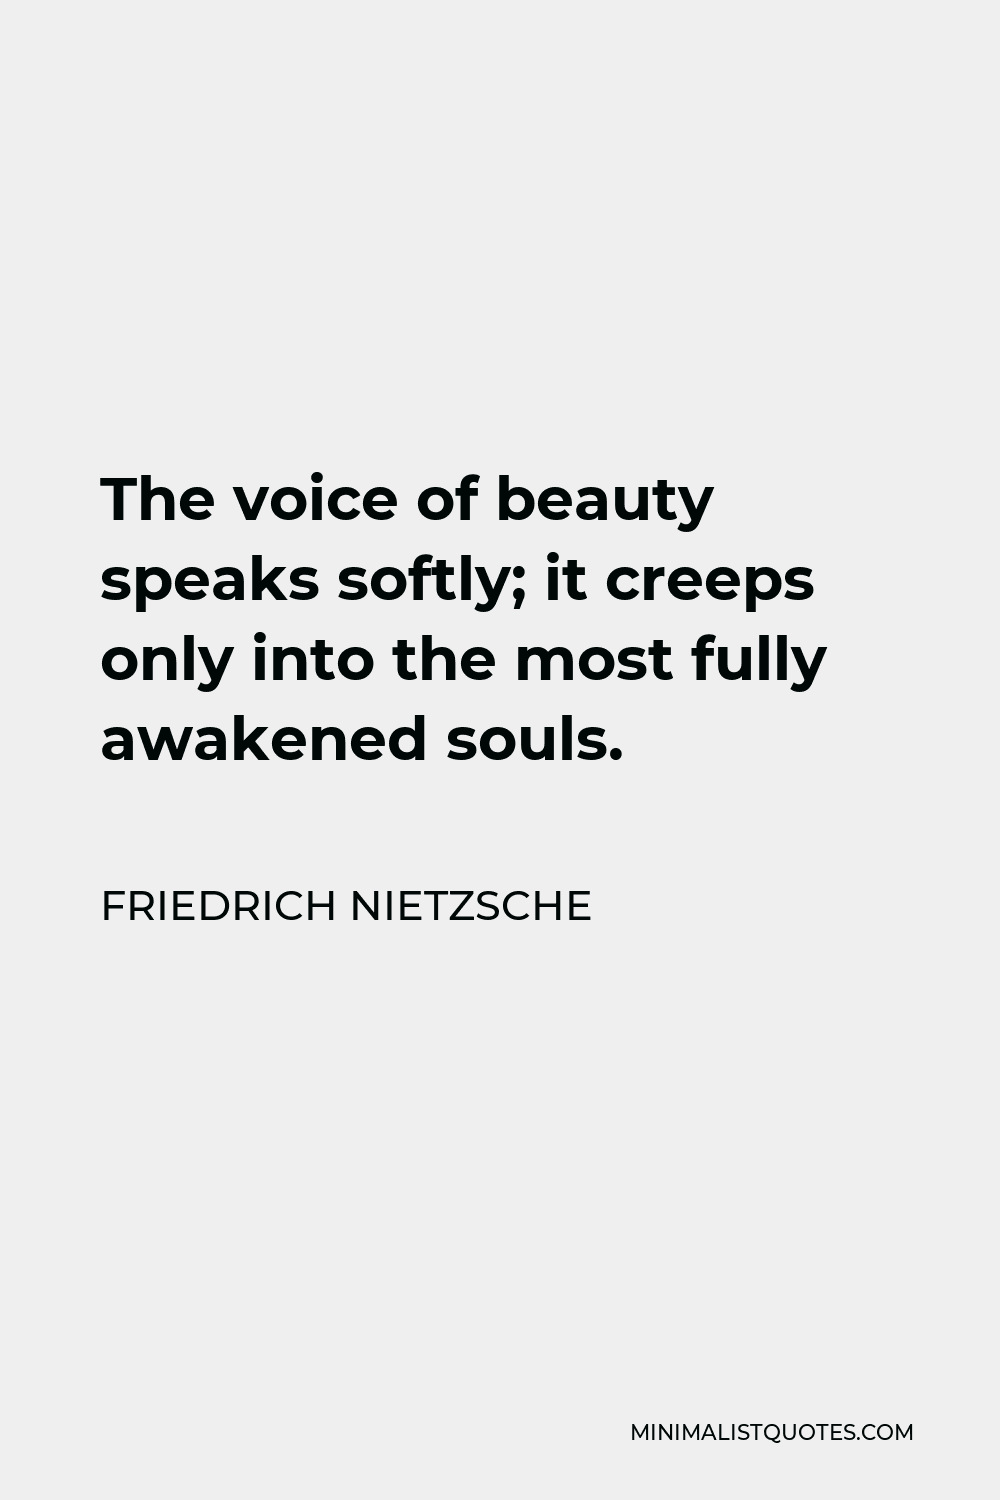 Friedrich Nietzsche Quote - The voice of beauty speaks softly; it creeps only into the most fully awakened souls.